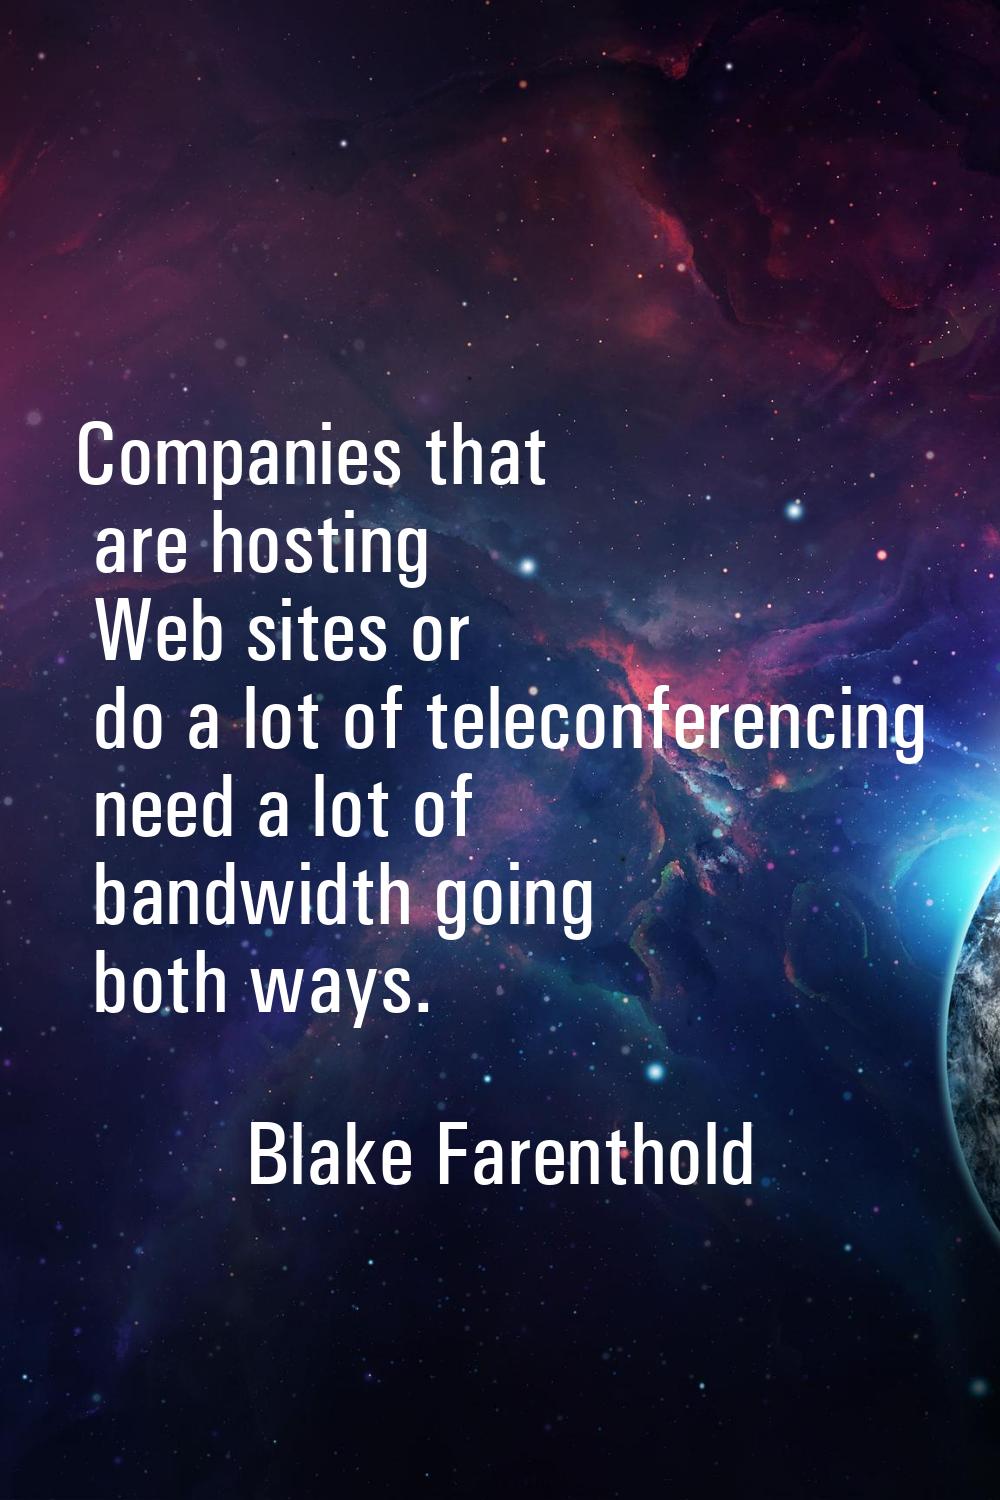 Companies that are hosting Web sites or do a lot of teleconferencing need a lot of bandwidth going 